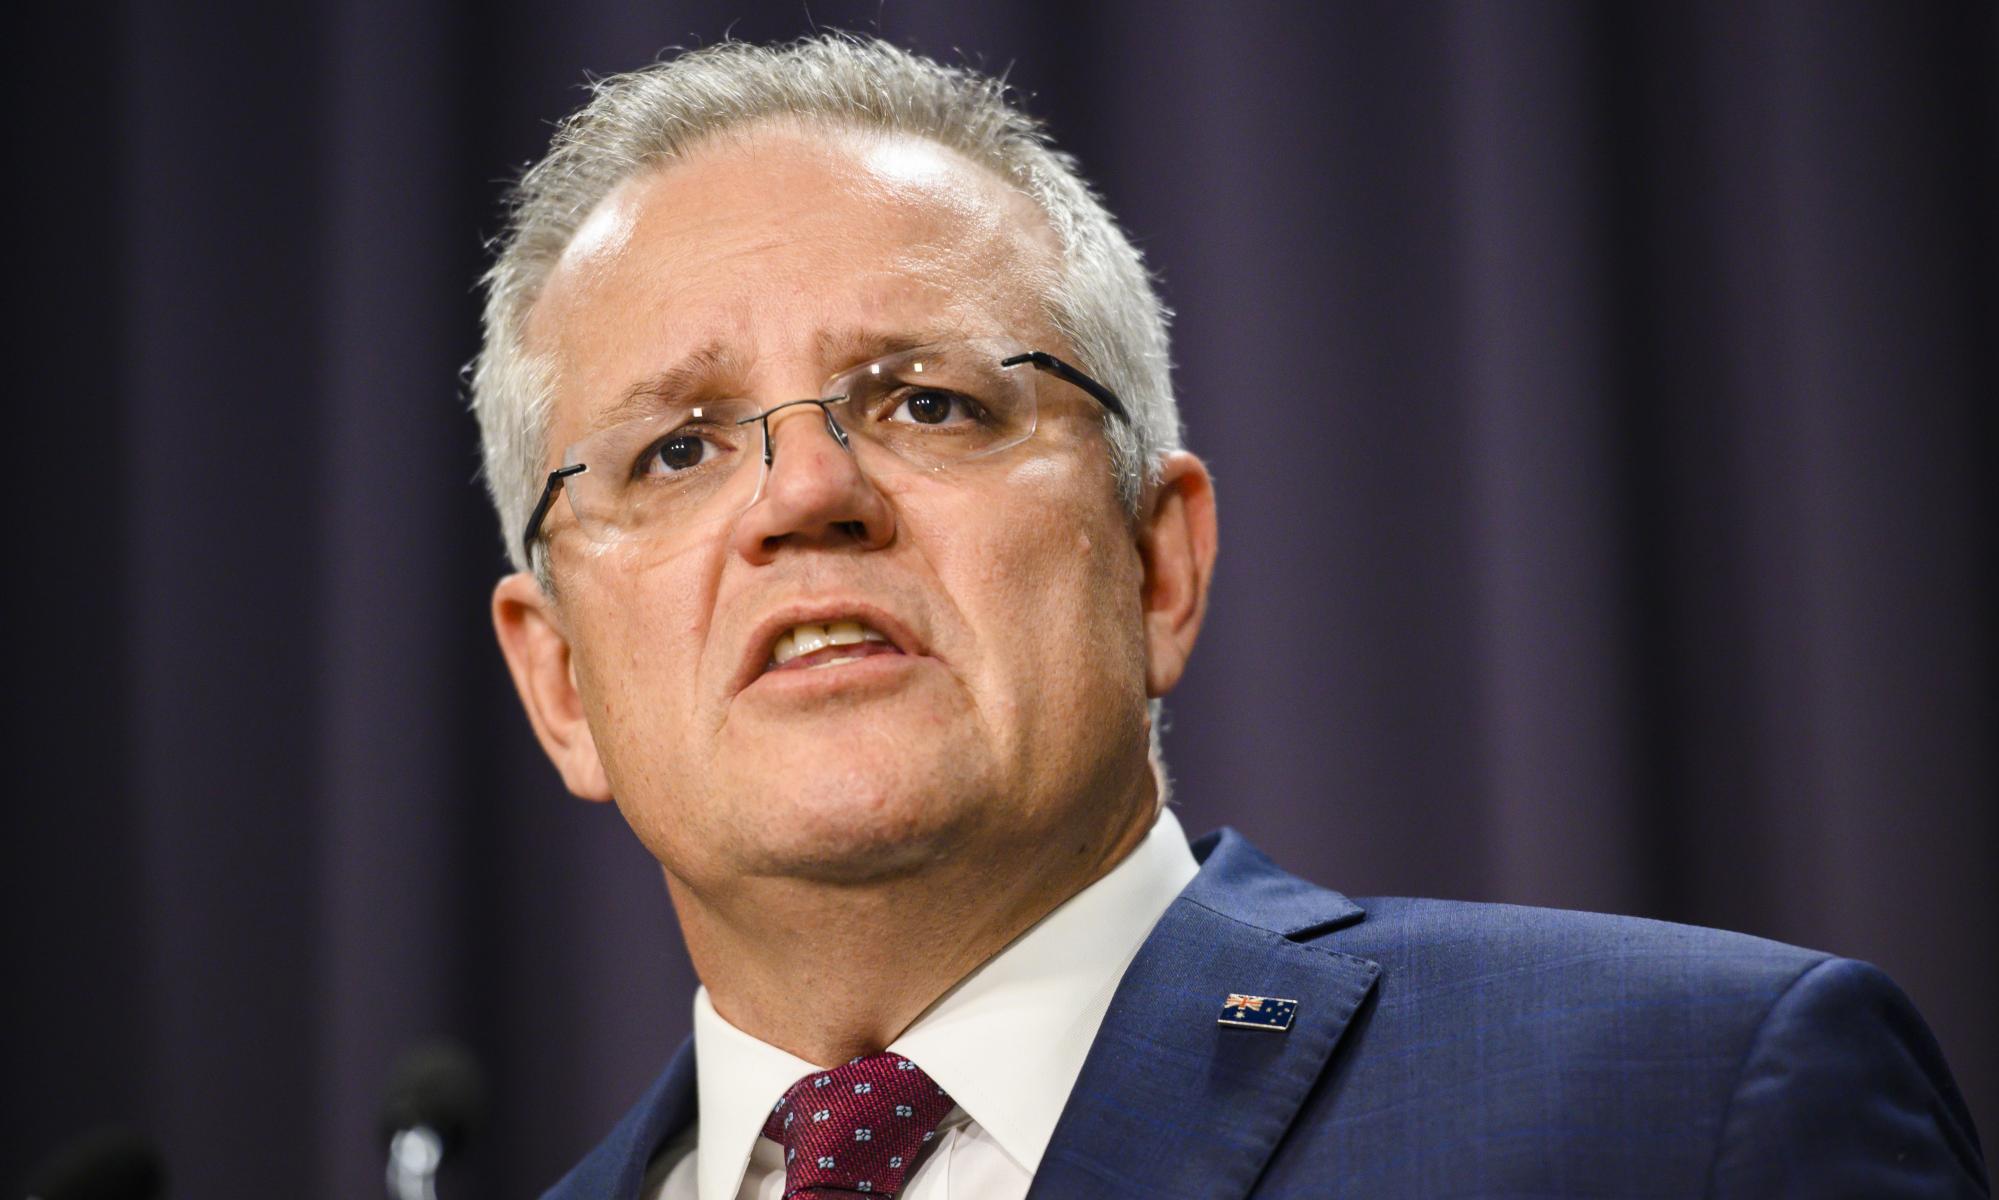 Scott Morrison's senior ministers discuss how to reposition climate policies